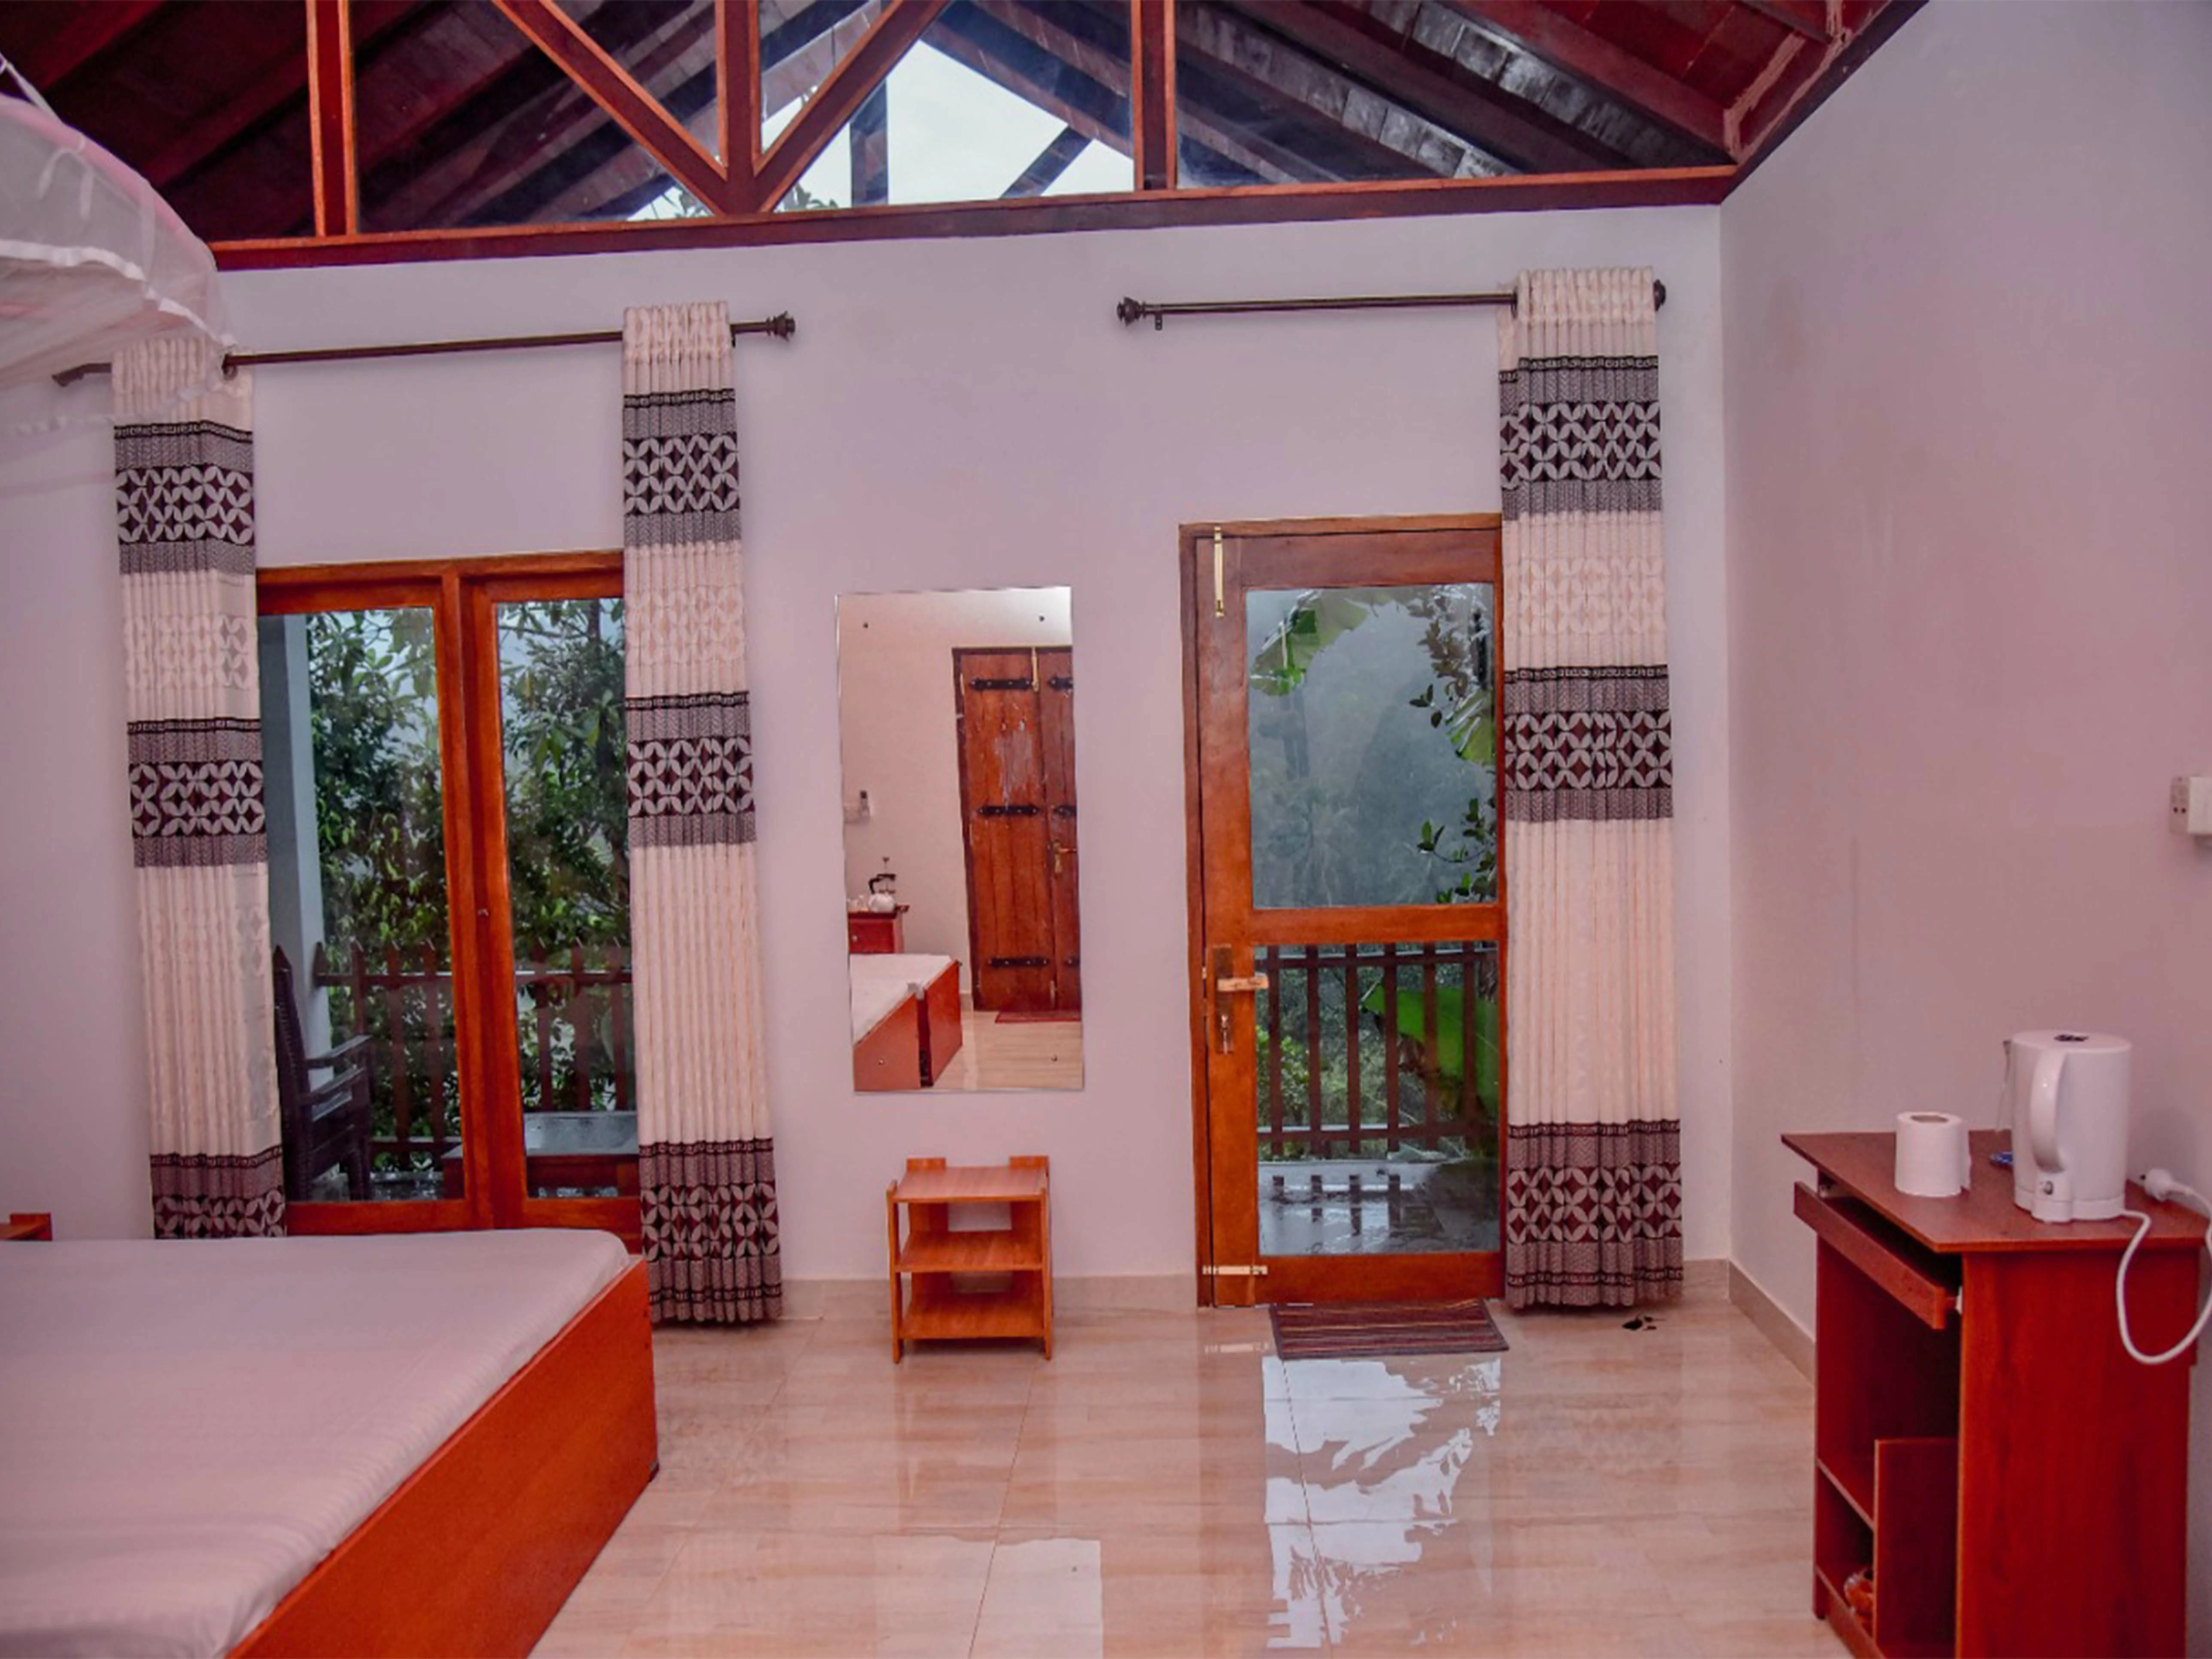 Deluxe-Family-Room-Sinharaja-Tour-Guide